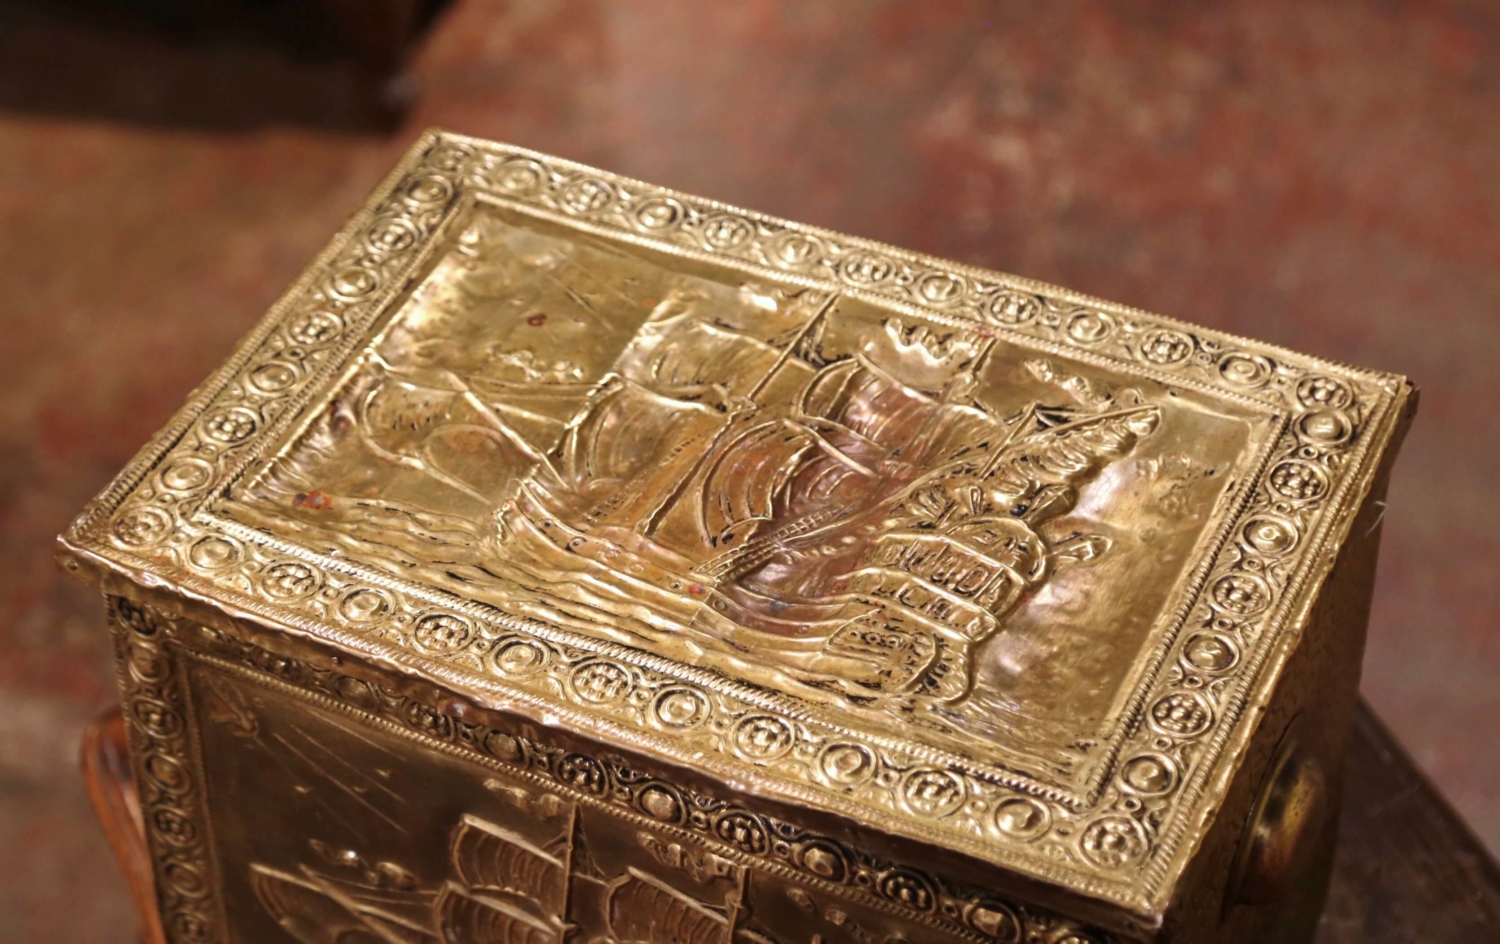 19th Century French Repousse Brass and Wood Box with Sailboat Decor -  Country French Interiors